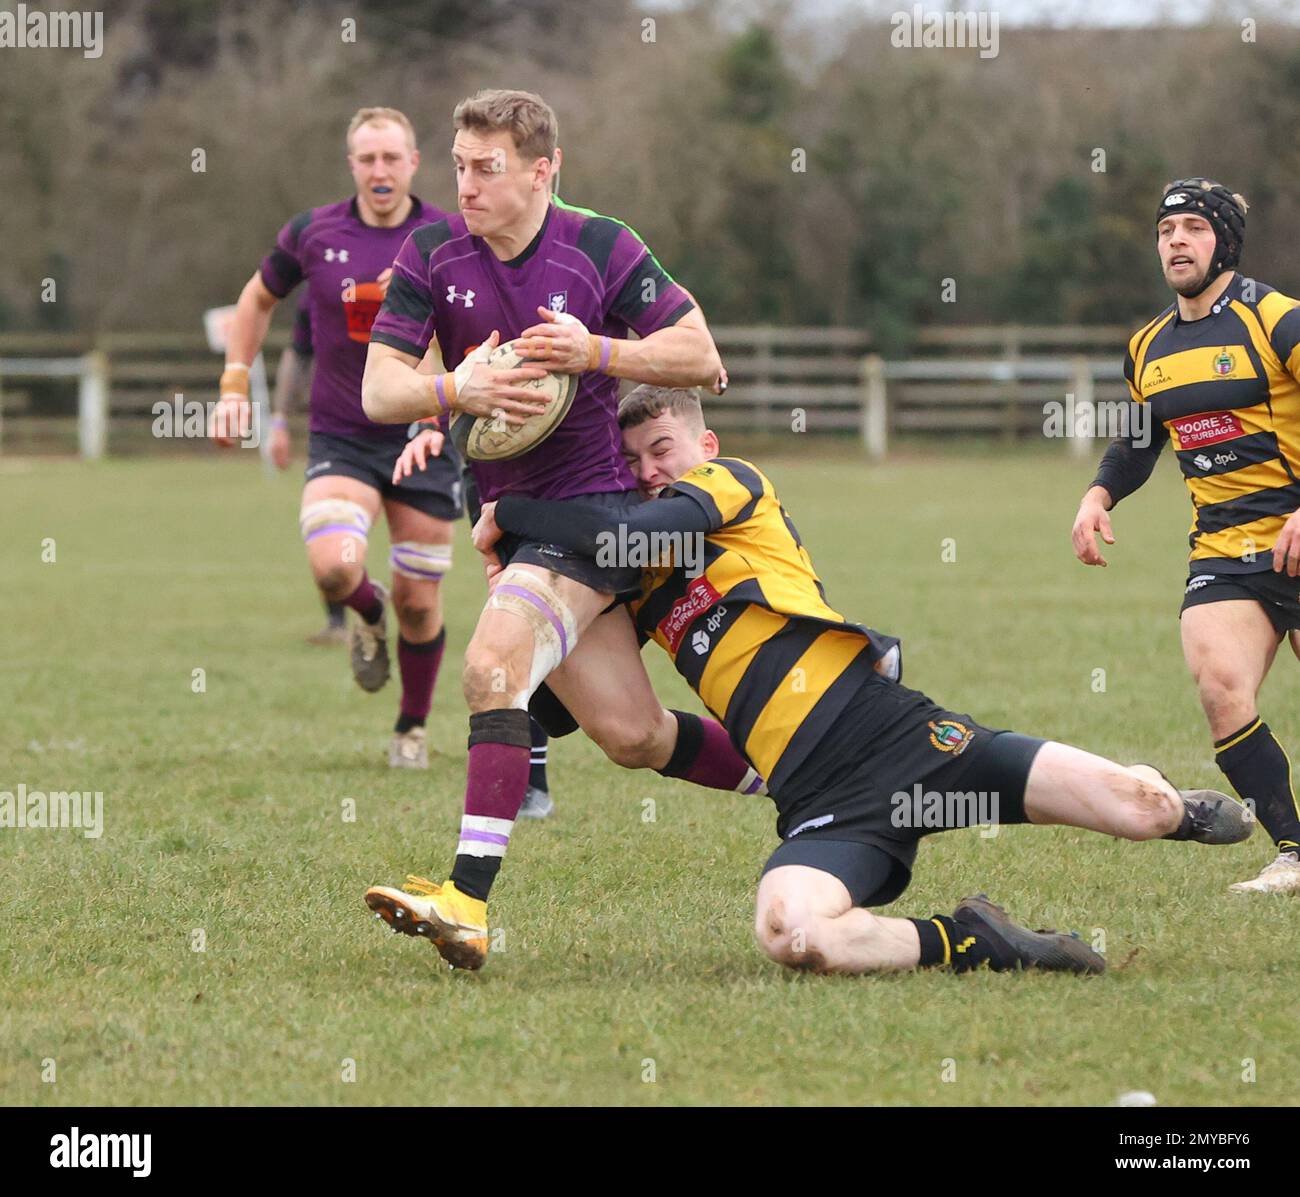 4.02.2022   Leicester, England. Rugby Union.                   Lions Alex Wilcockson shows determination in his break during the National League 2 West match played between Leicester Lions and Hinckley rfc at Westleigh Park, Blaby, Leicester.  © Phil Hutchinson Stock Photo